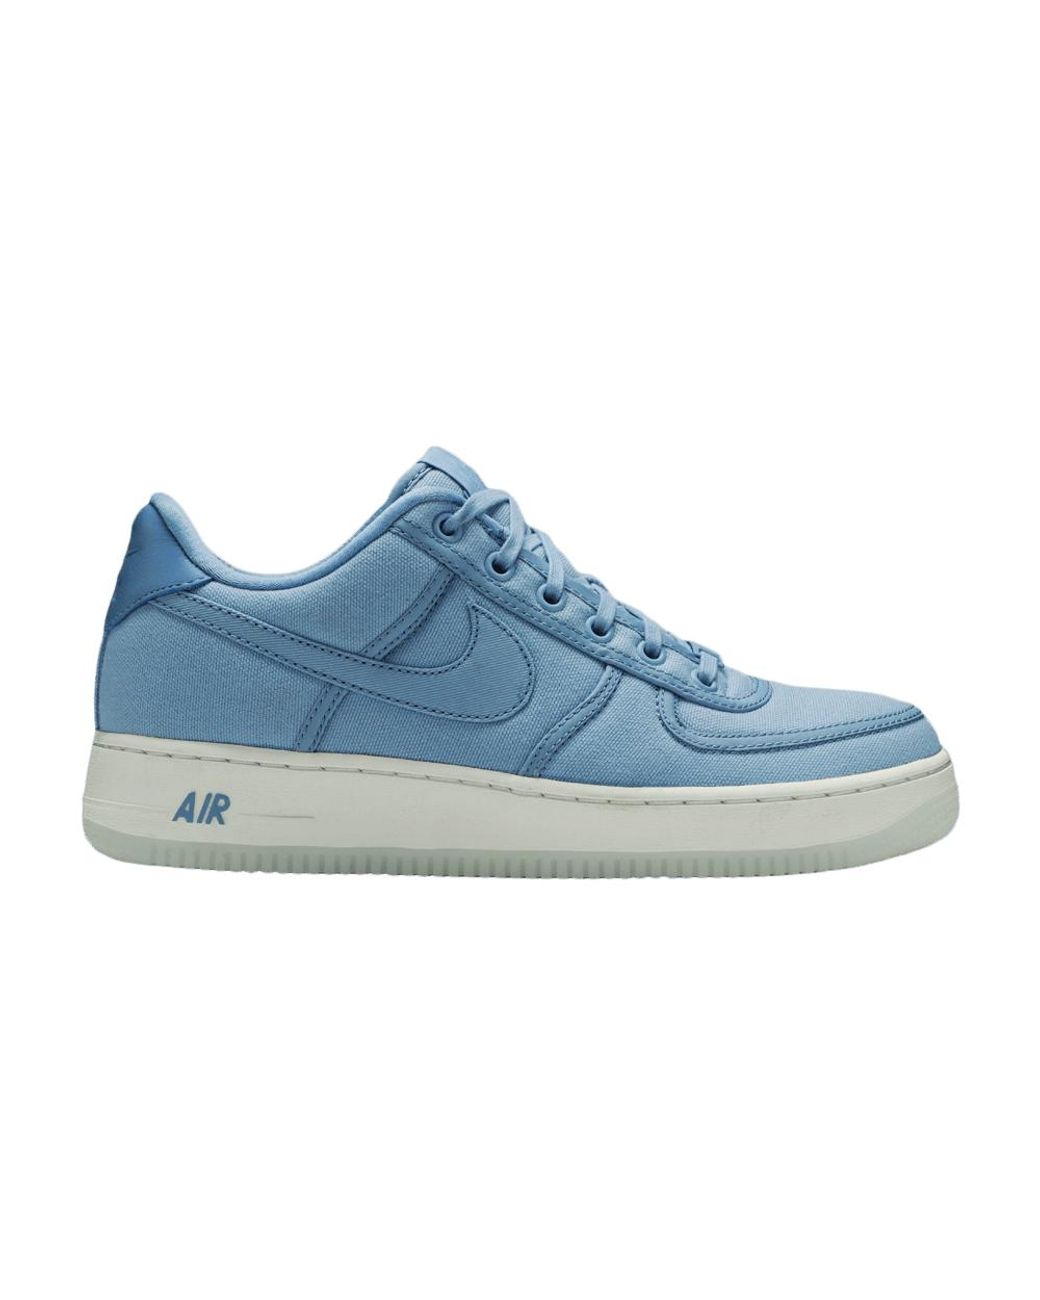 Nike Air Force 1 Low Retro Qs in Blue for Men - Lyst